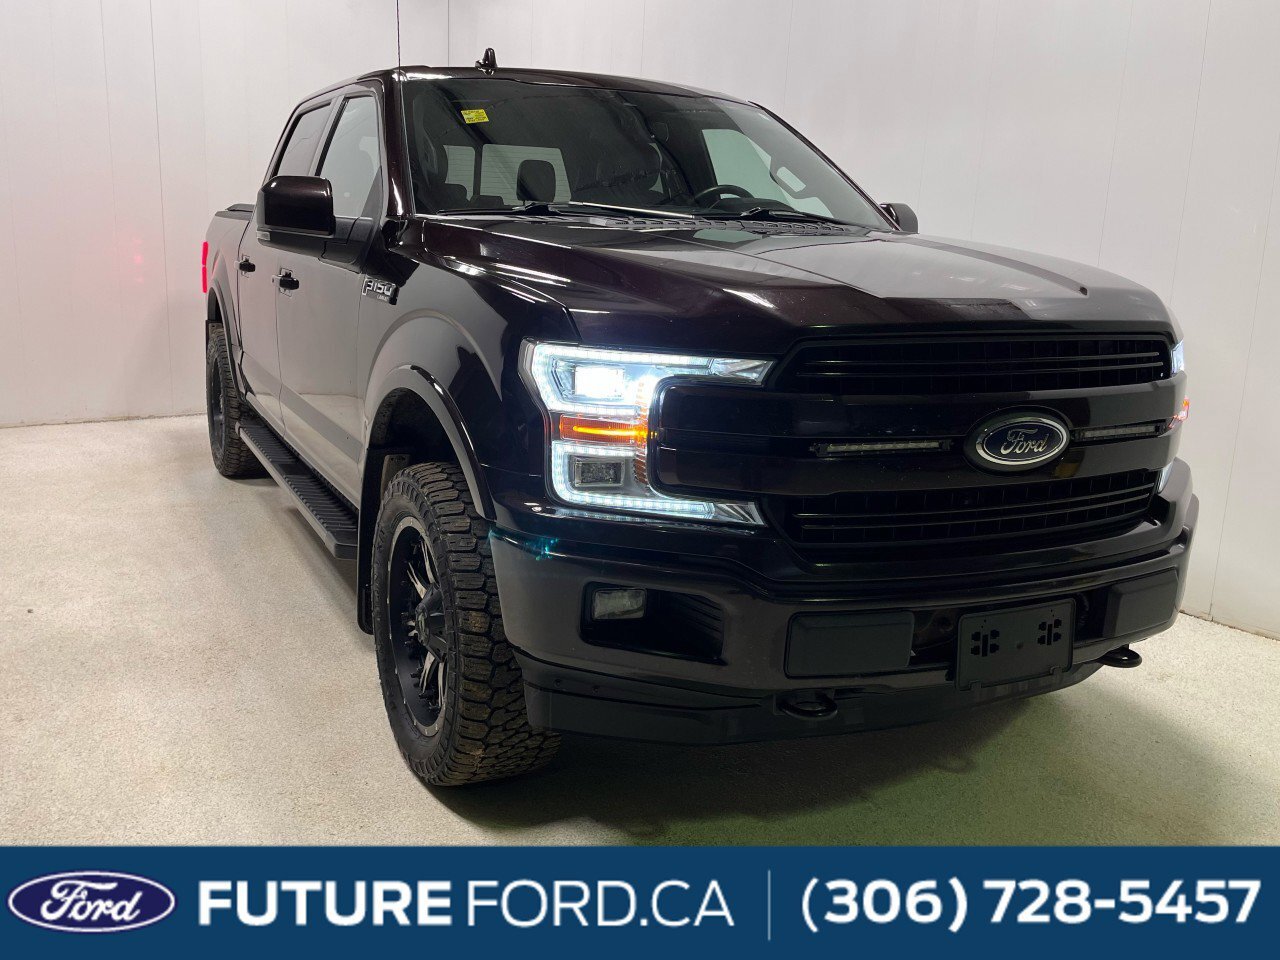 2018 Ford F-150 LARIAT | REMOTE VEHICLE START | REAR VIEW CAMERA |